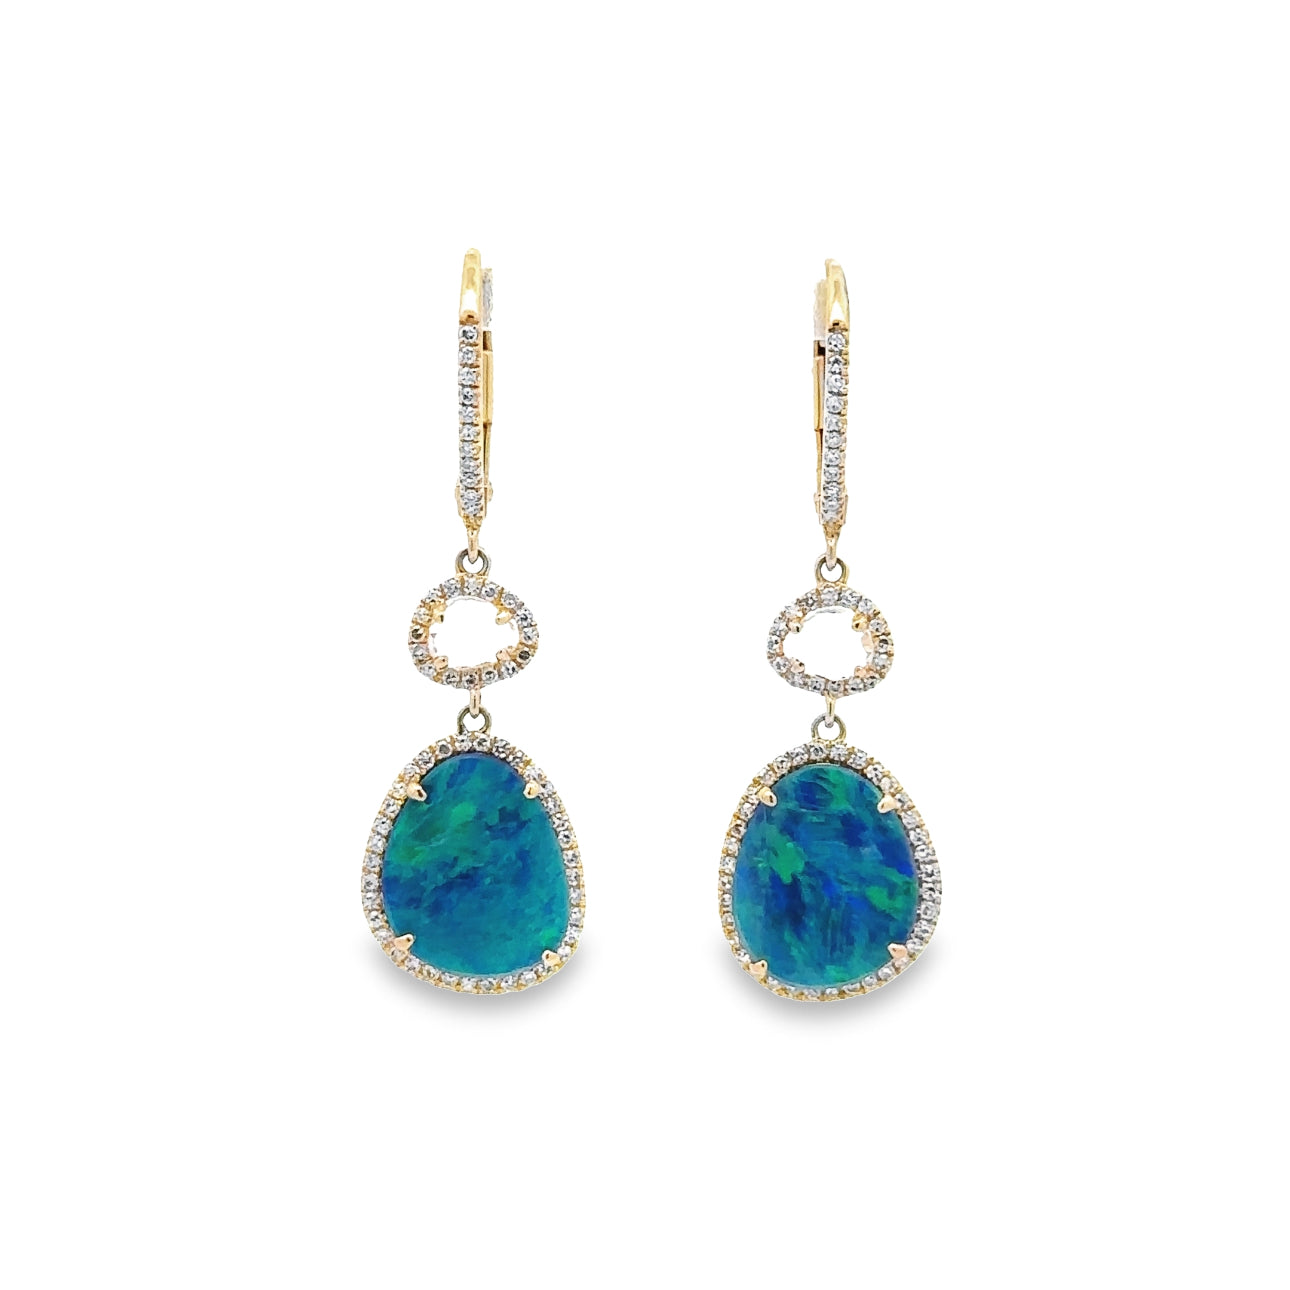 WD1332 14kt Gold White Topaz and Opal Drop Earring with Diamond Detail